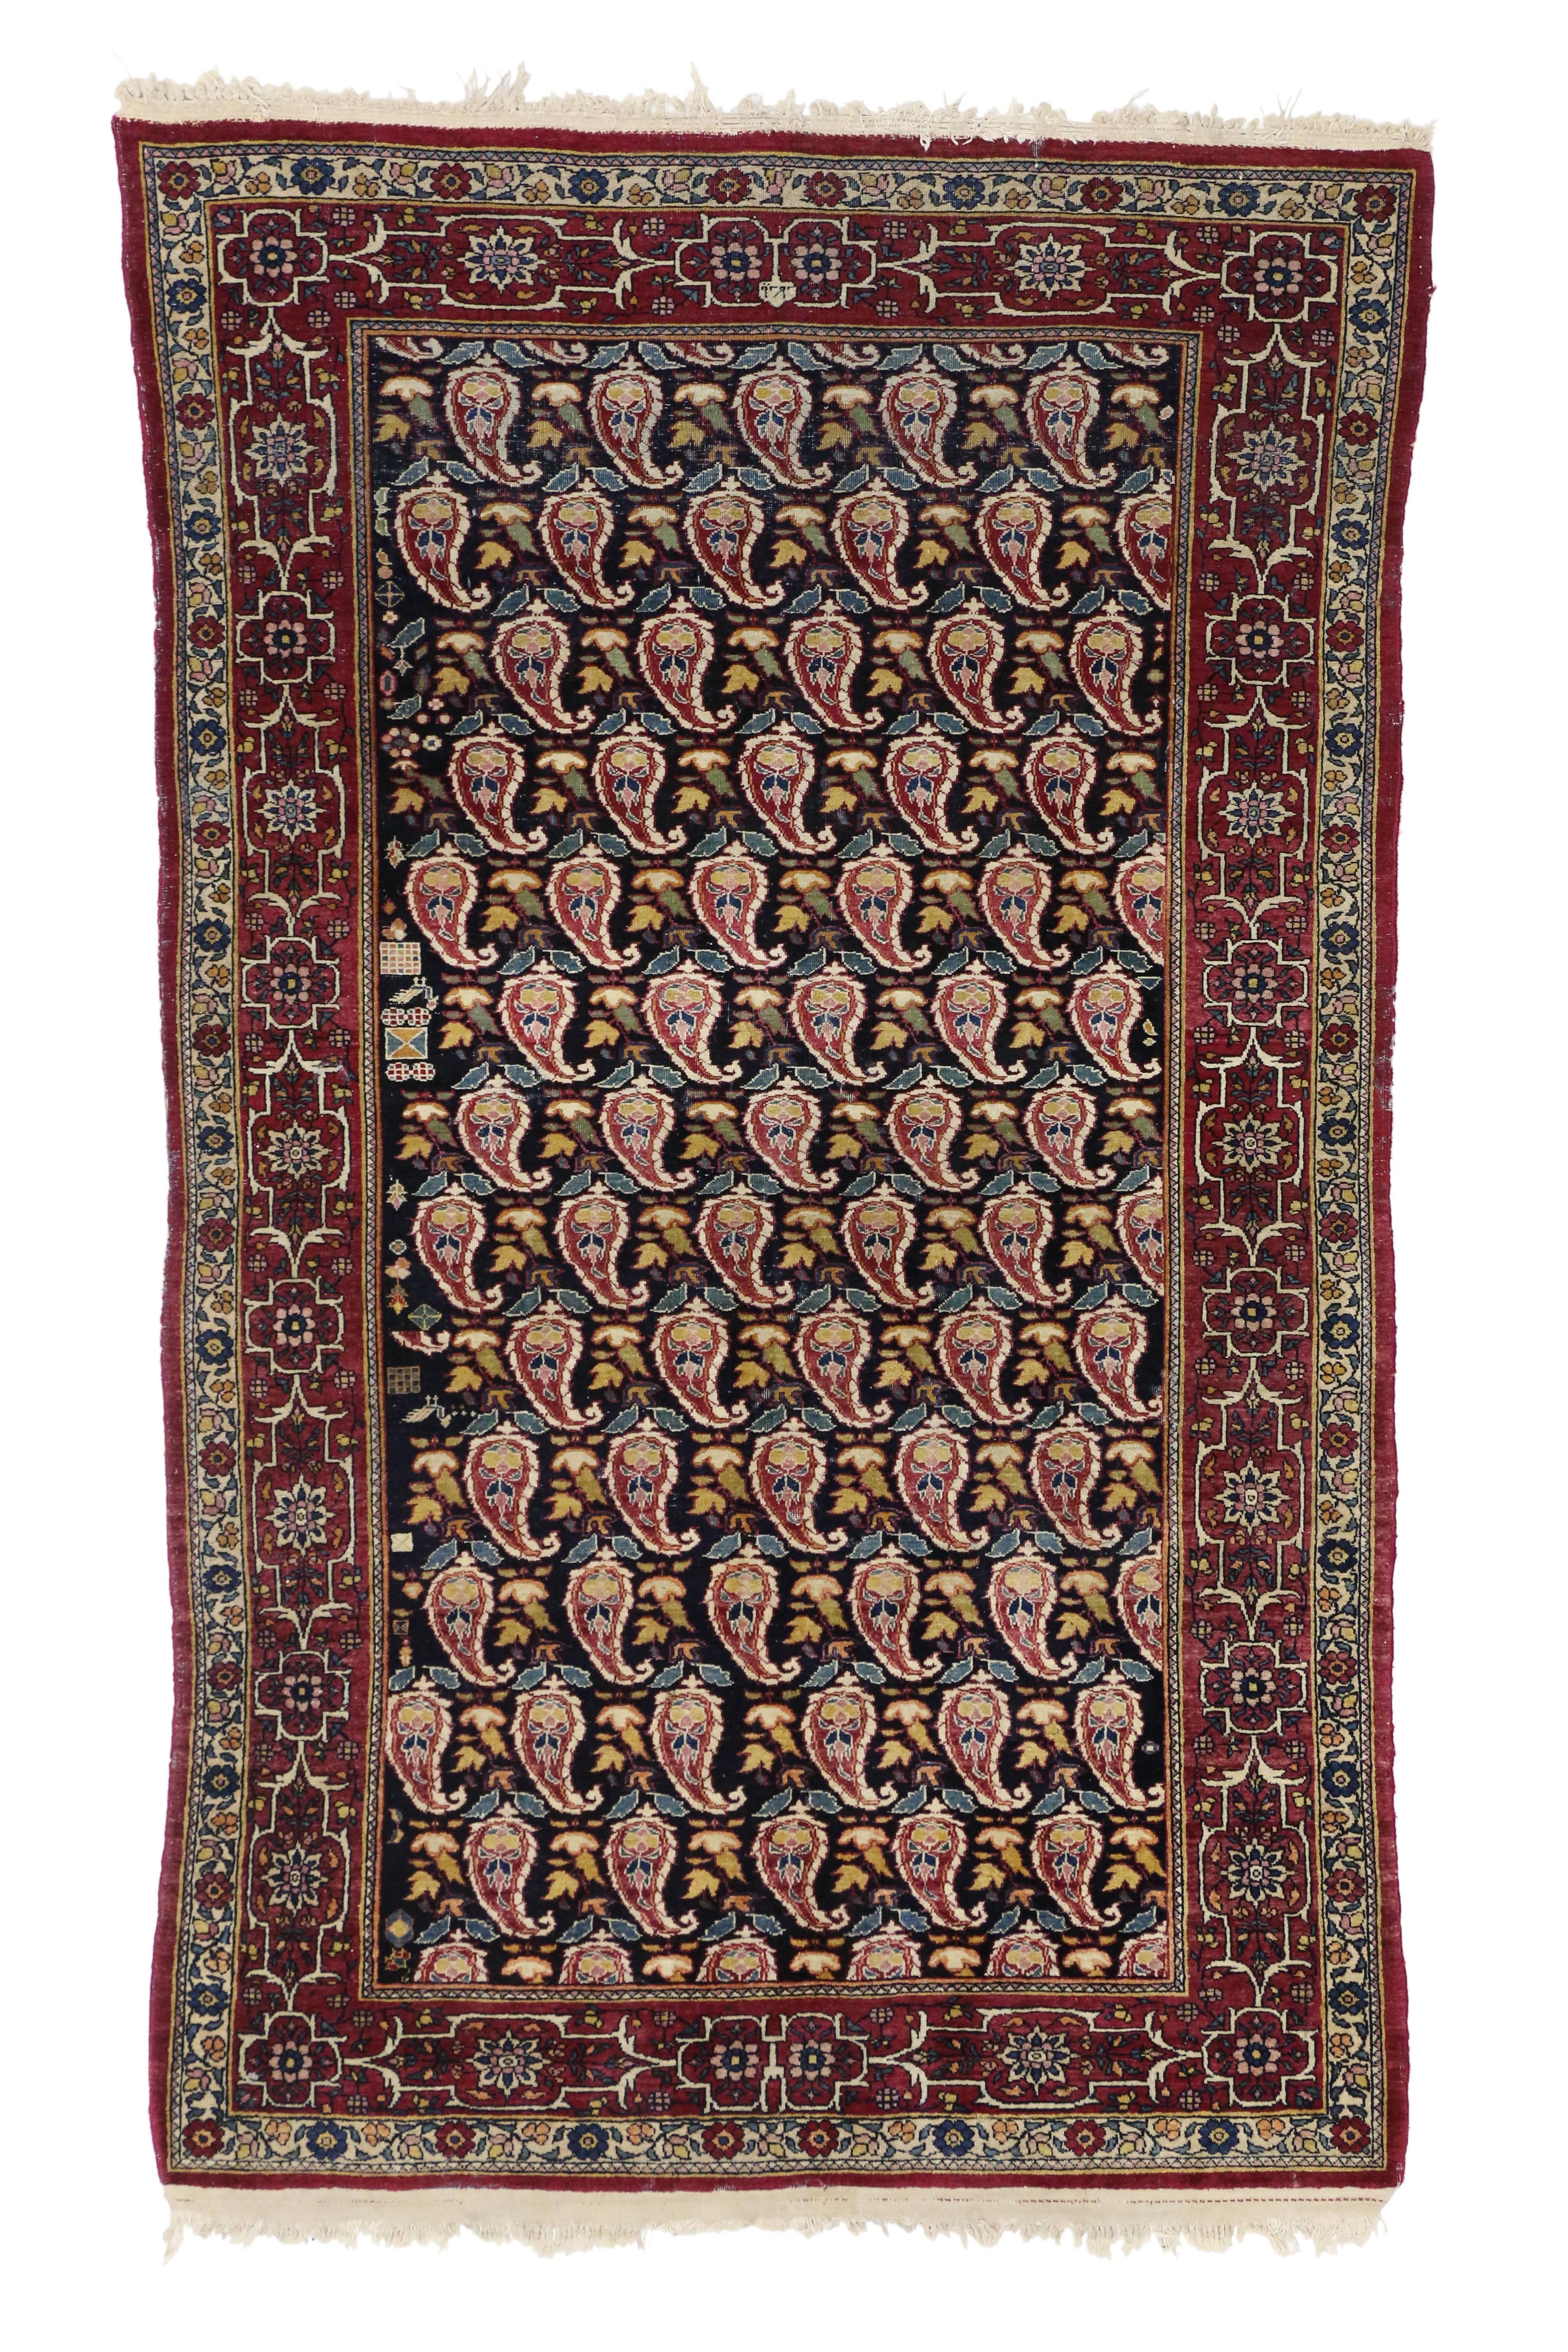 Antique Persian Kerman Rug with All-Over Boteh Pattern In Distressed Condition For Sale In Dallas, TX